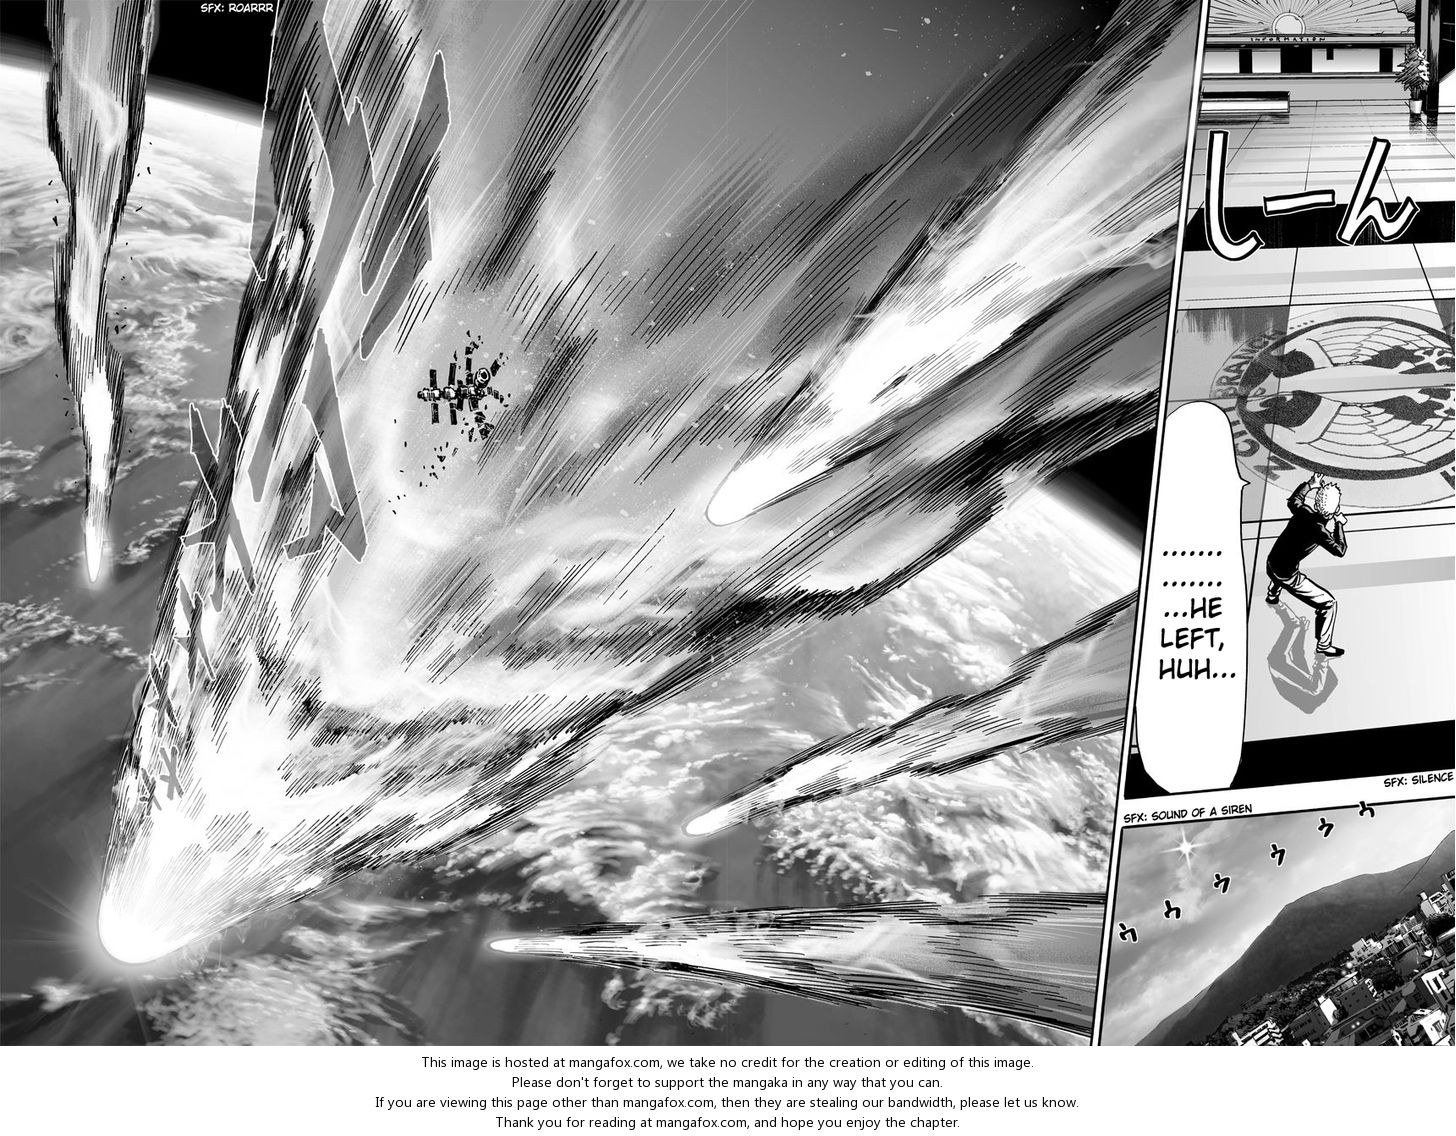 Onepunch-Man Vol.04 Ch.021.1 - 21st Punch [Giant Meteor] (1)